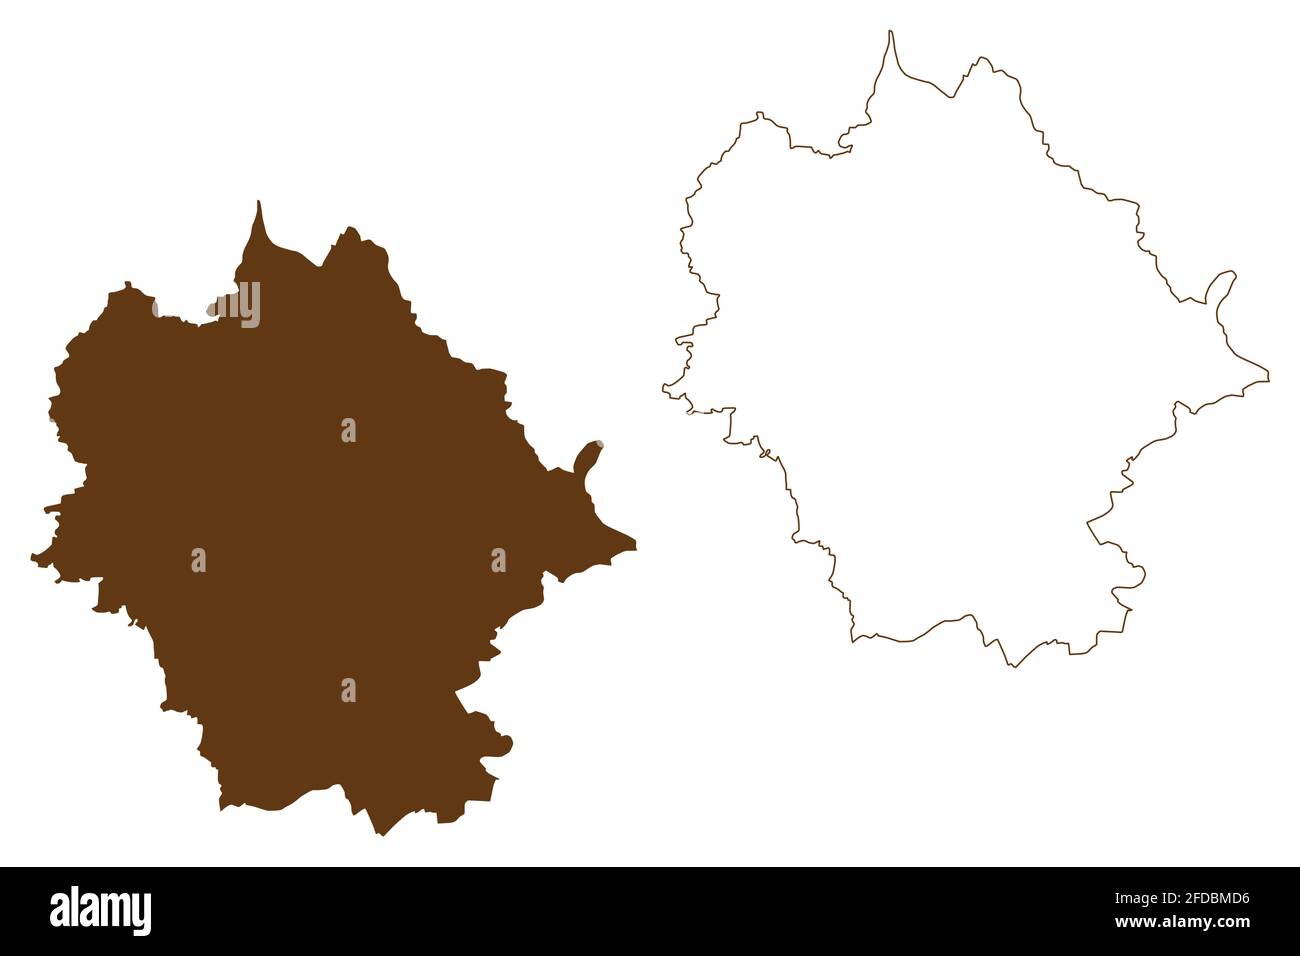 Limburg-Weilburg district (Federal Republic of Germany, rural district Giessen region, State of Hessen, Hesse, Hessia) map vector illustration, scribb Stock Vector